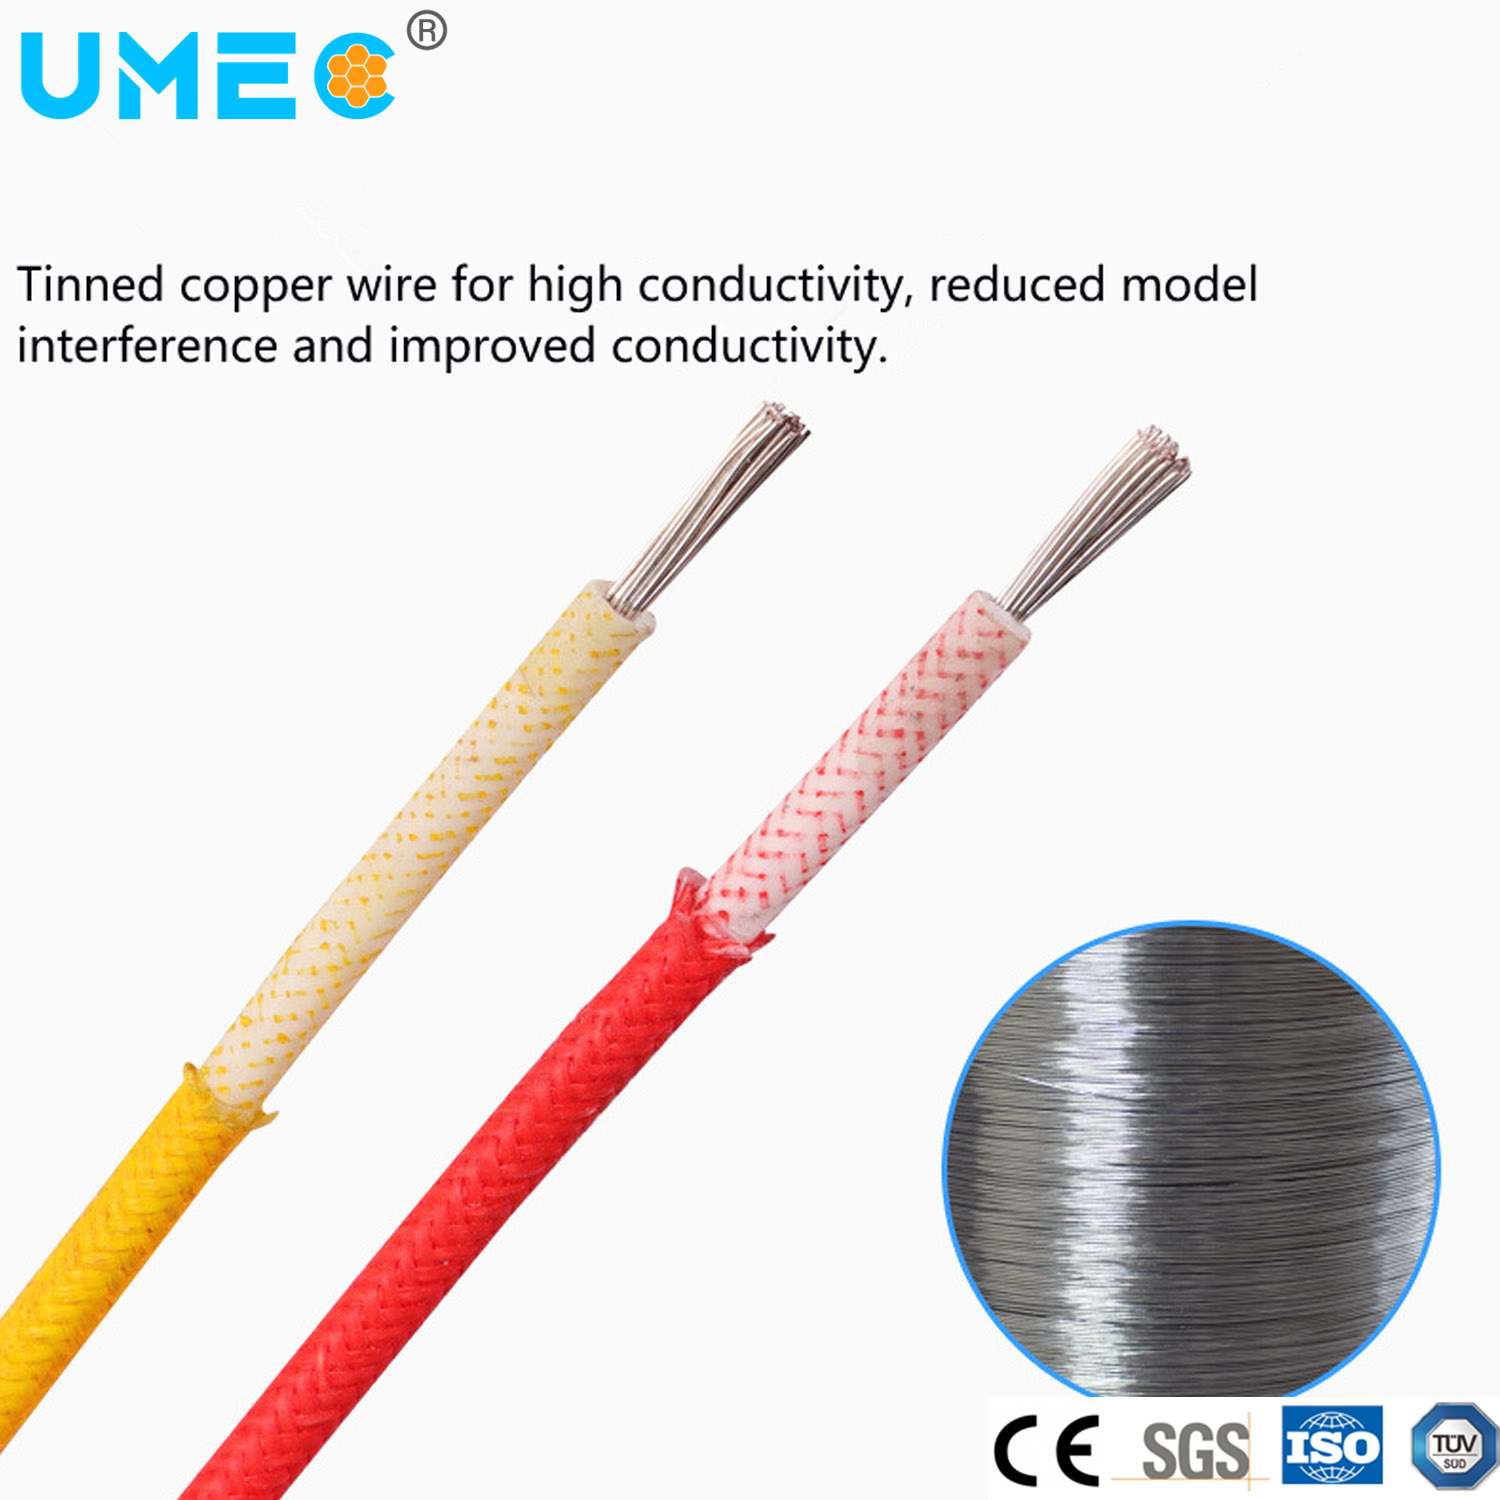 IEC 60228 Fine Wired Stranded 300/500V Halogen Free Heat Resistance Agrp Agr Cable Wire